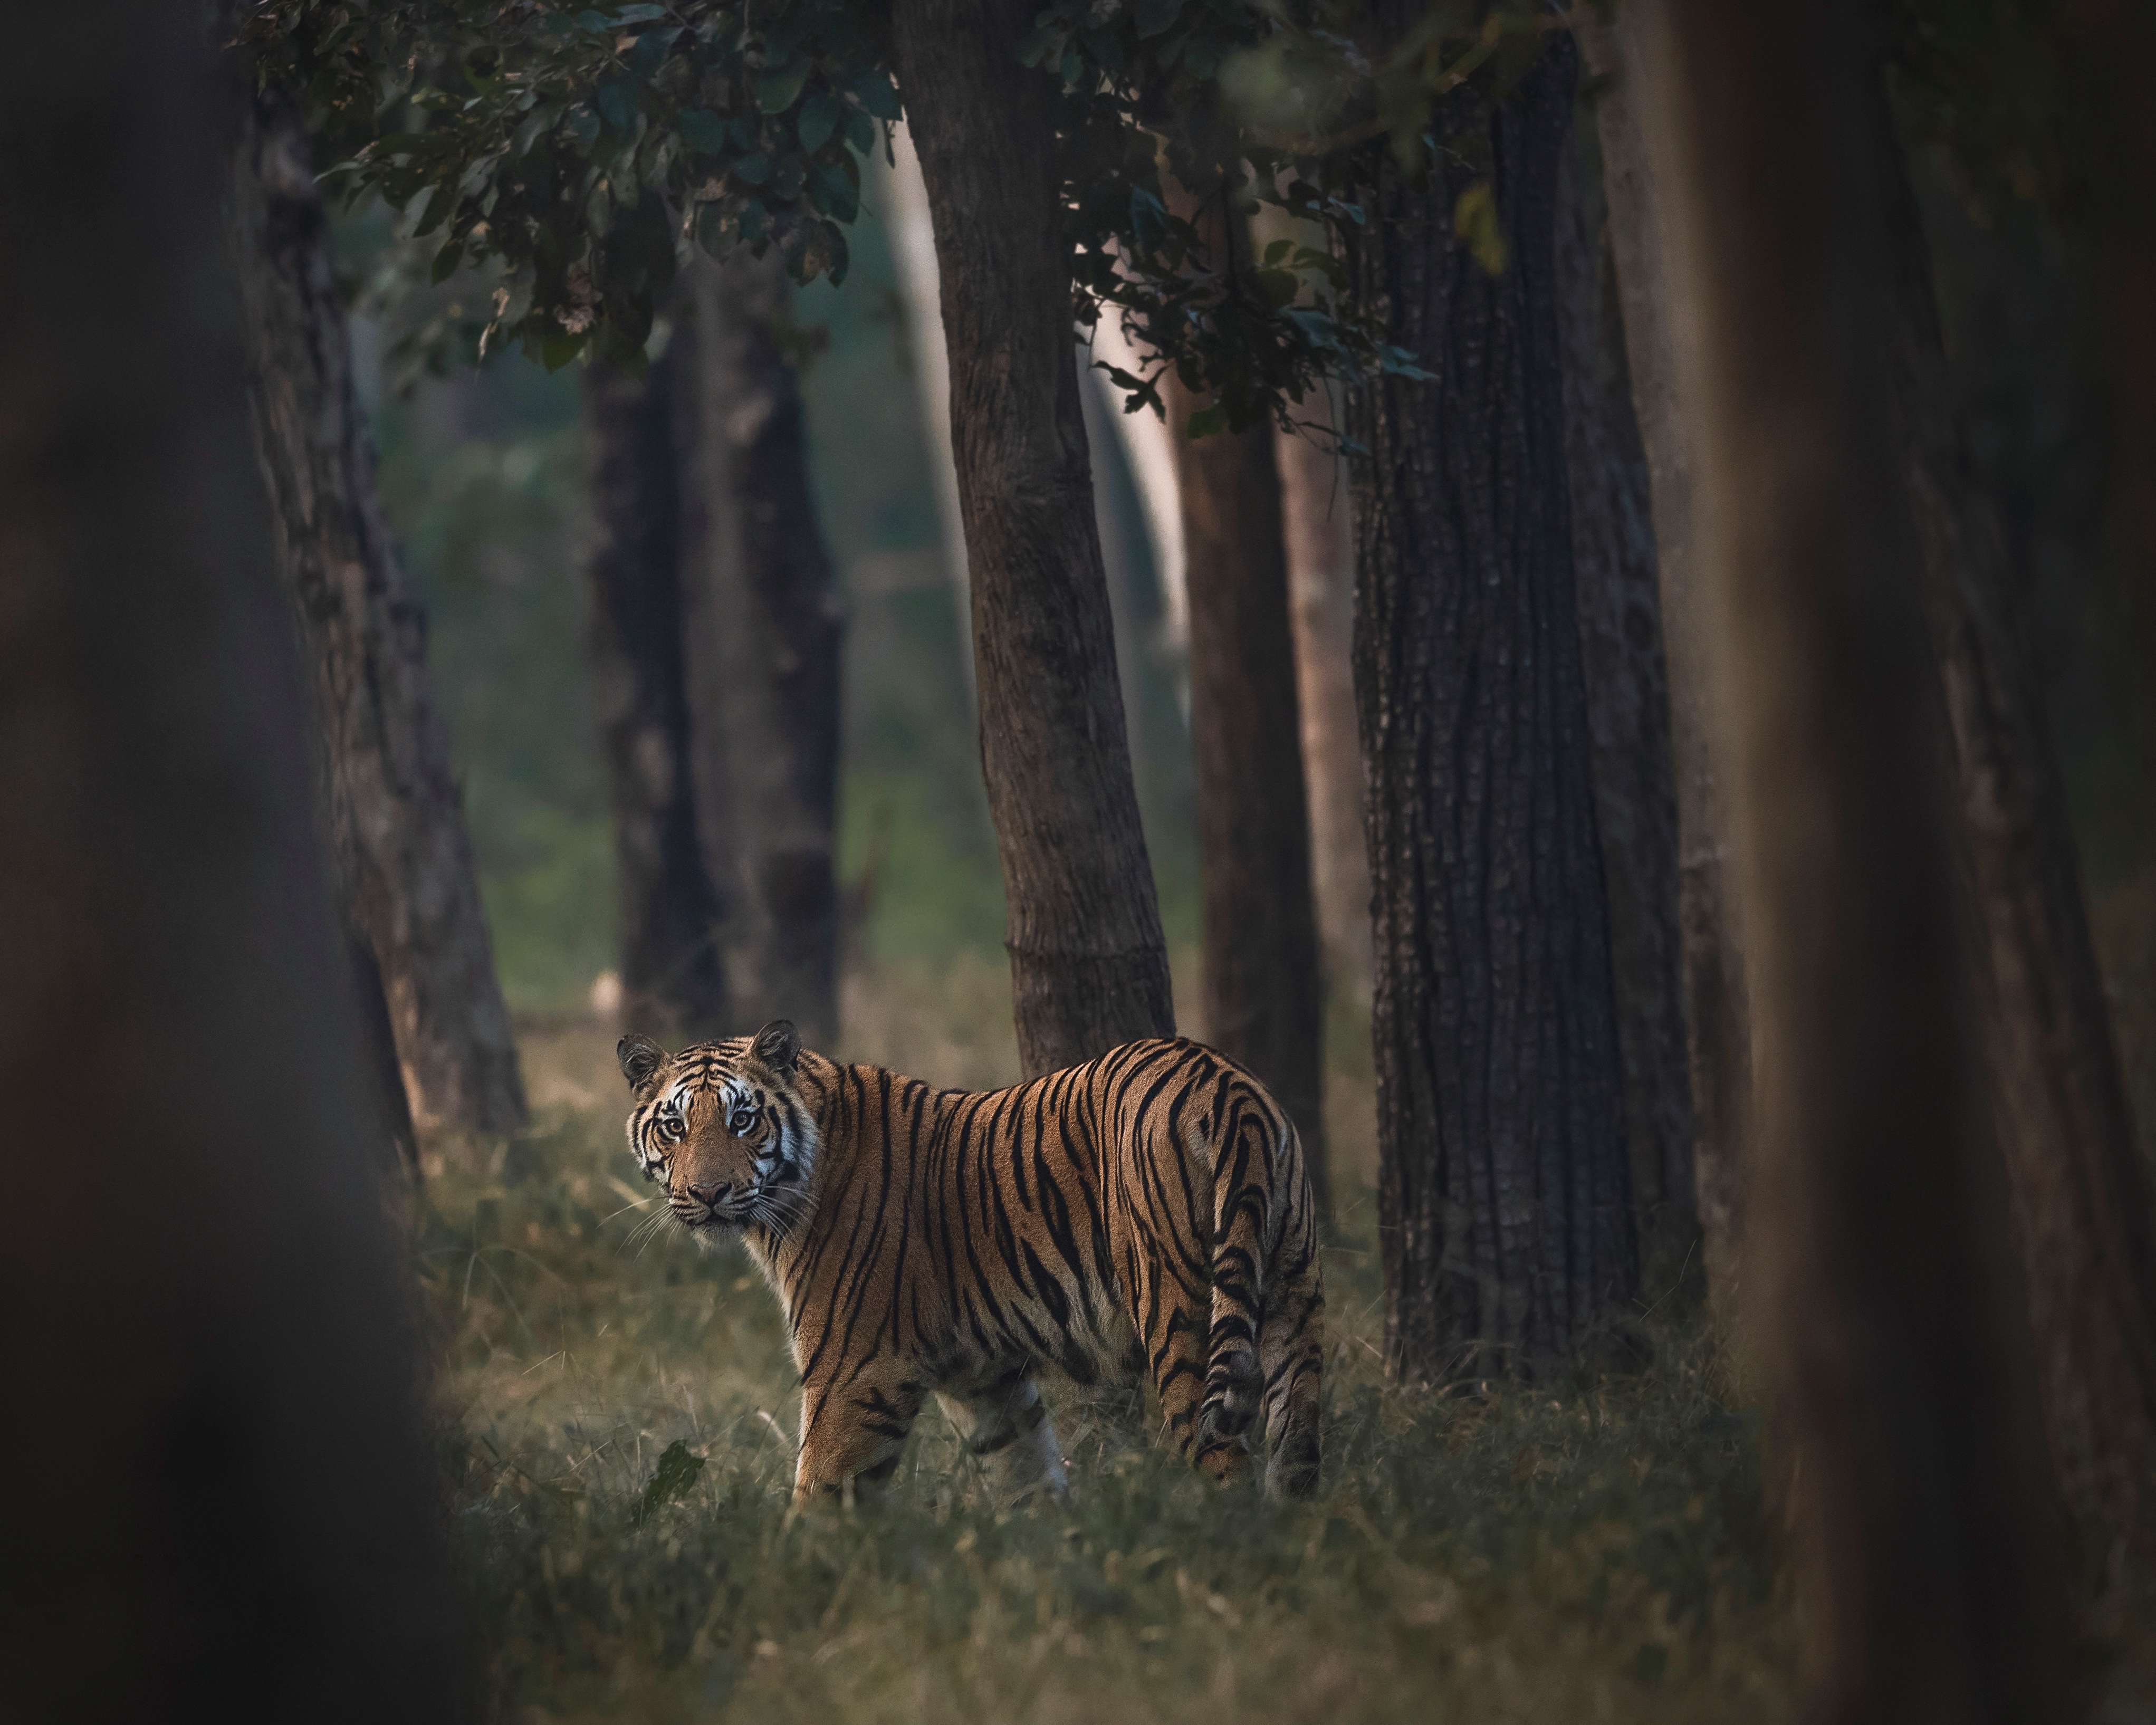 A tiger staring through the trees